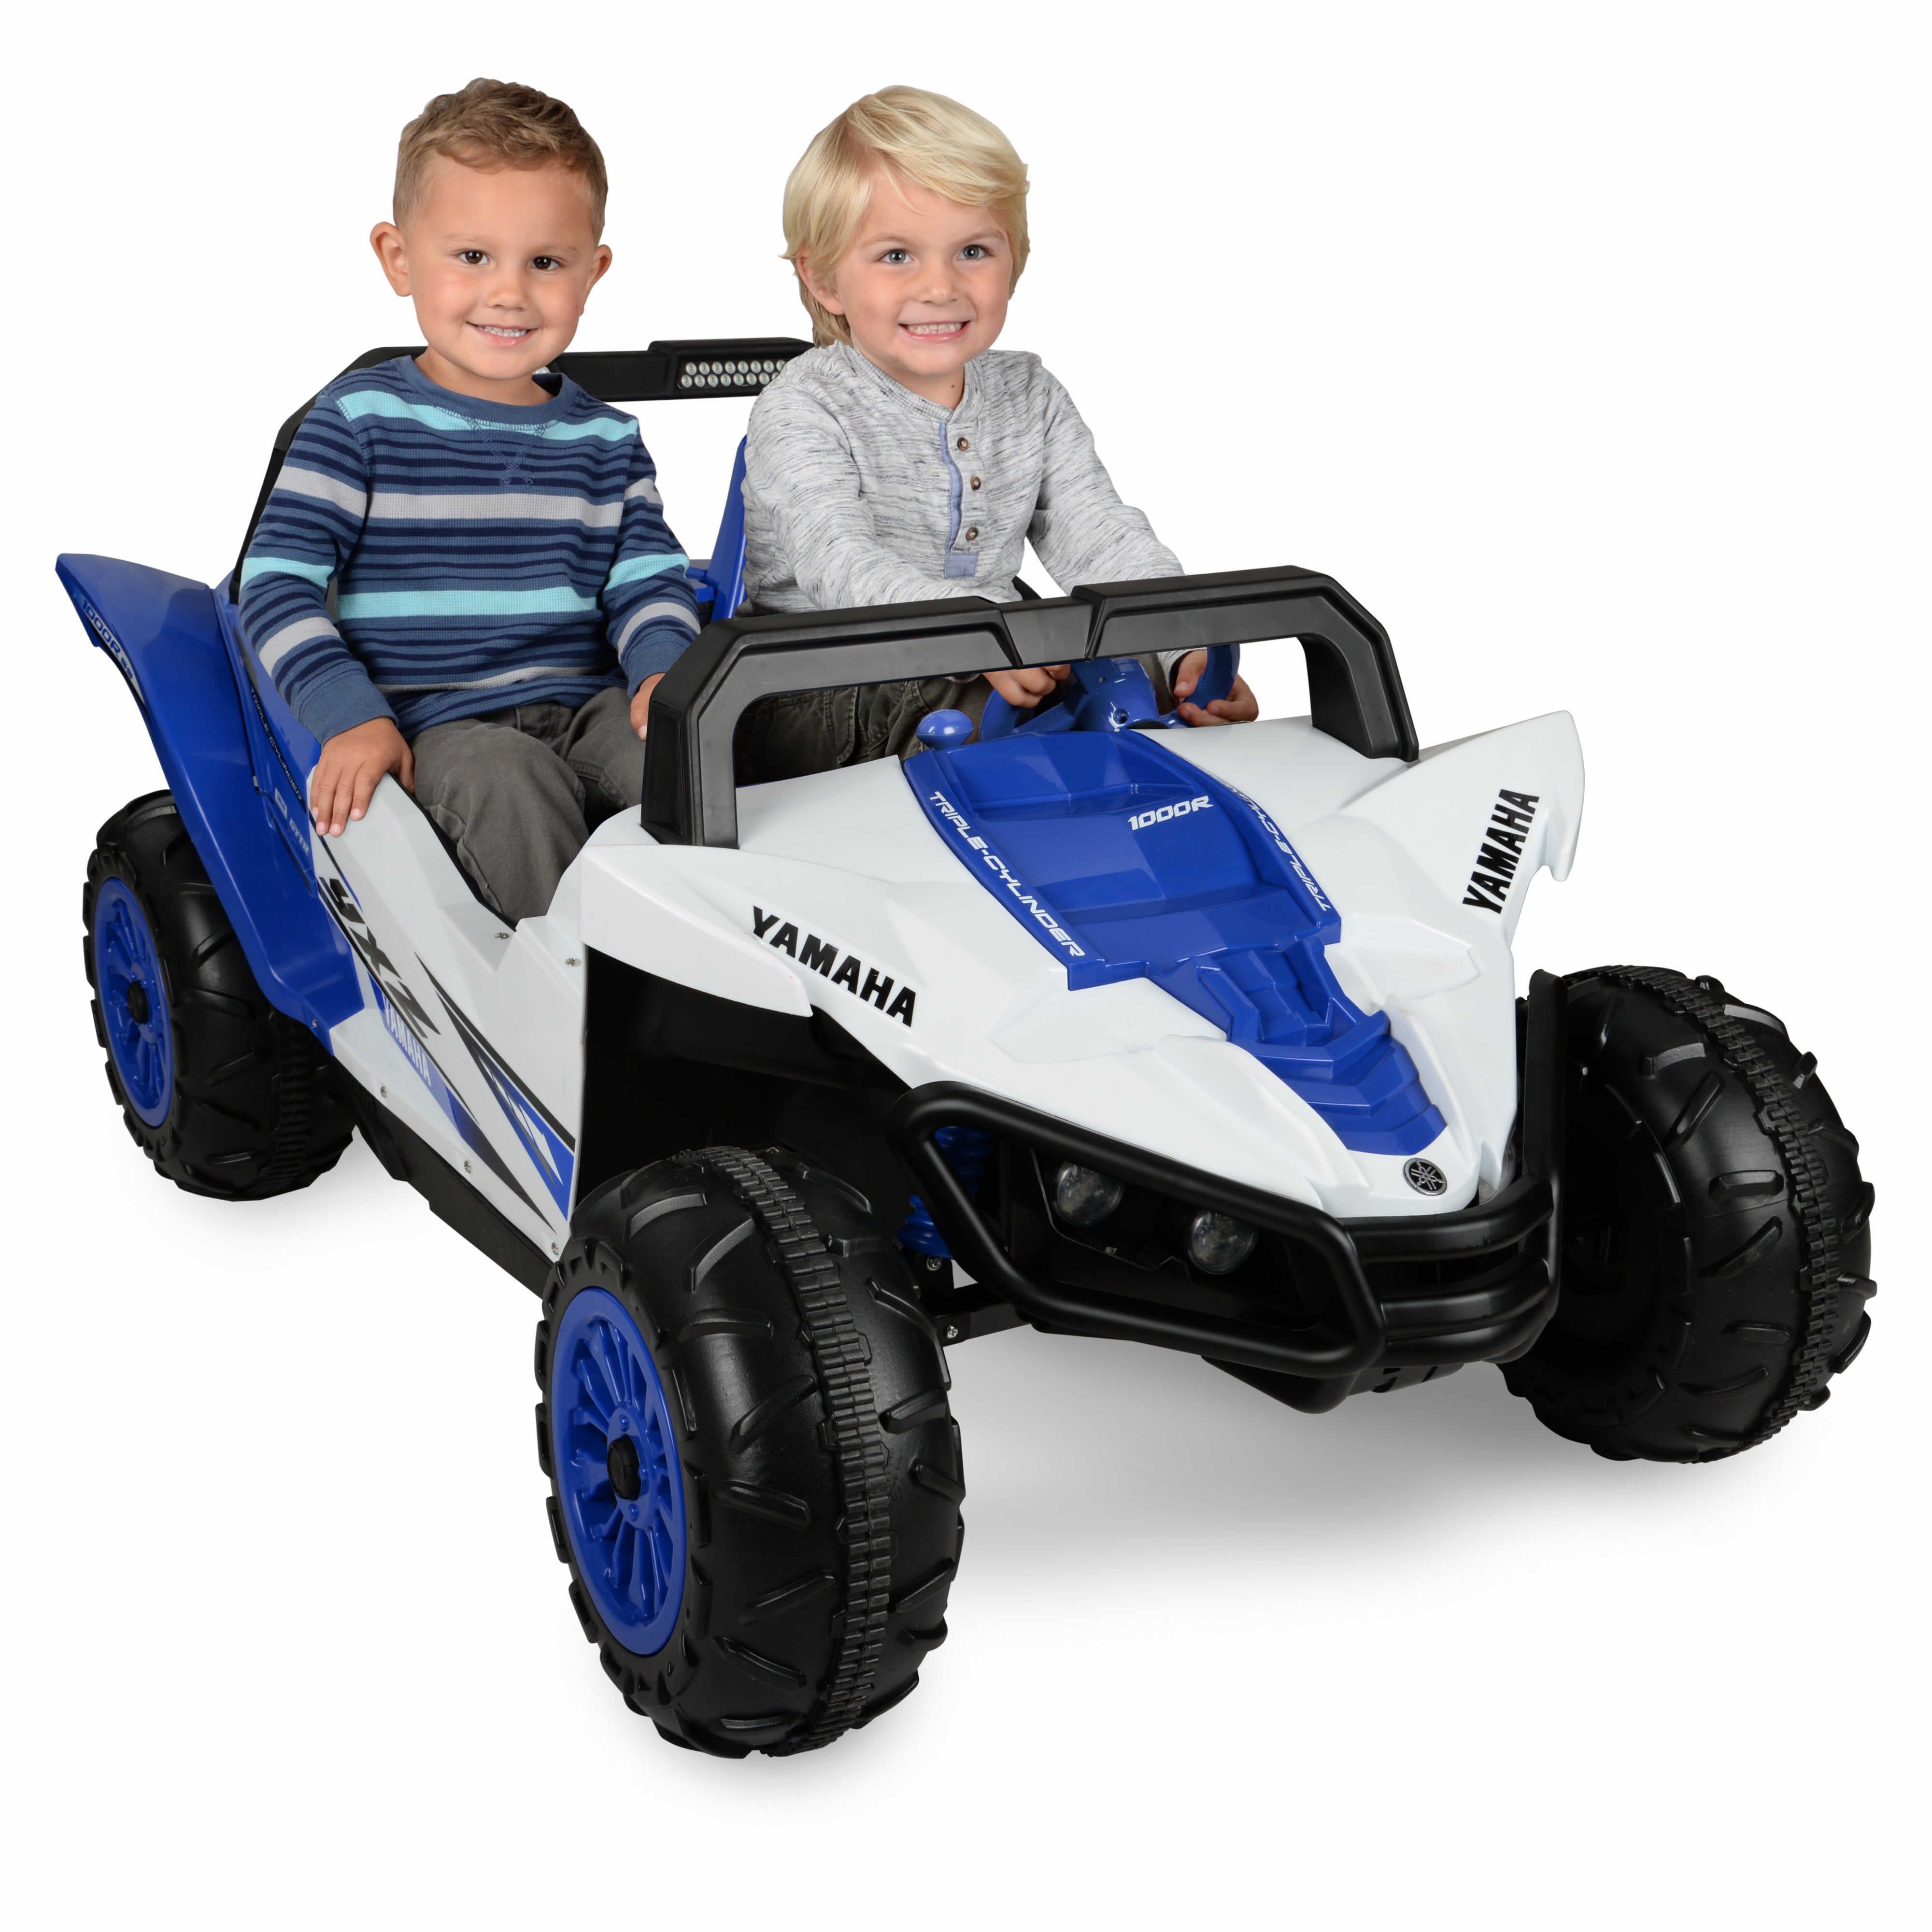 12 volt battery powered ride on toys